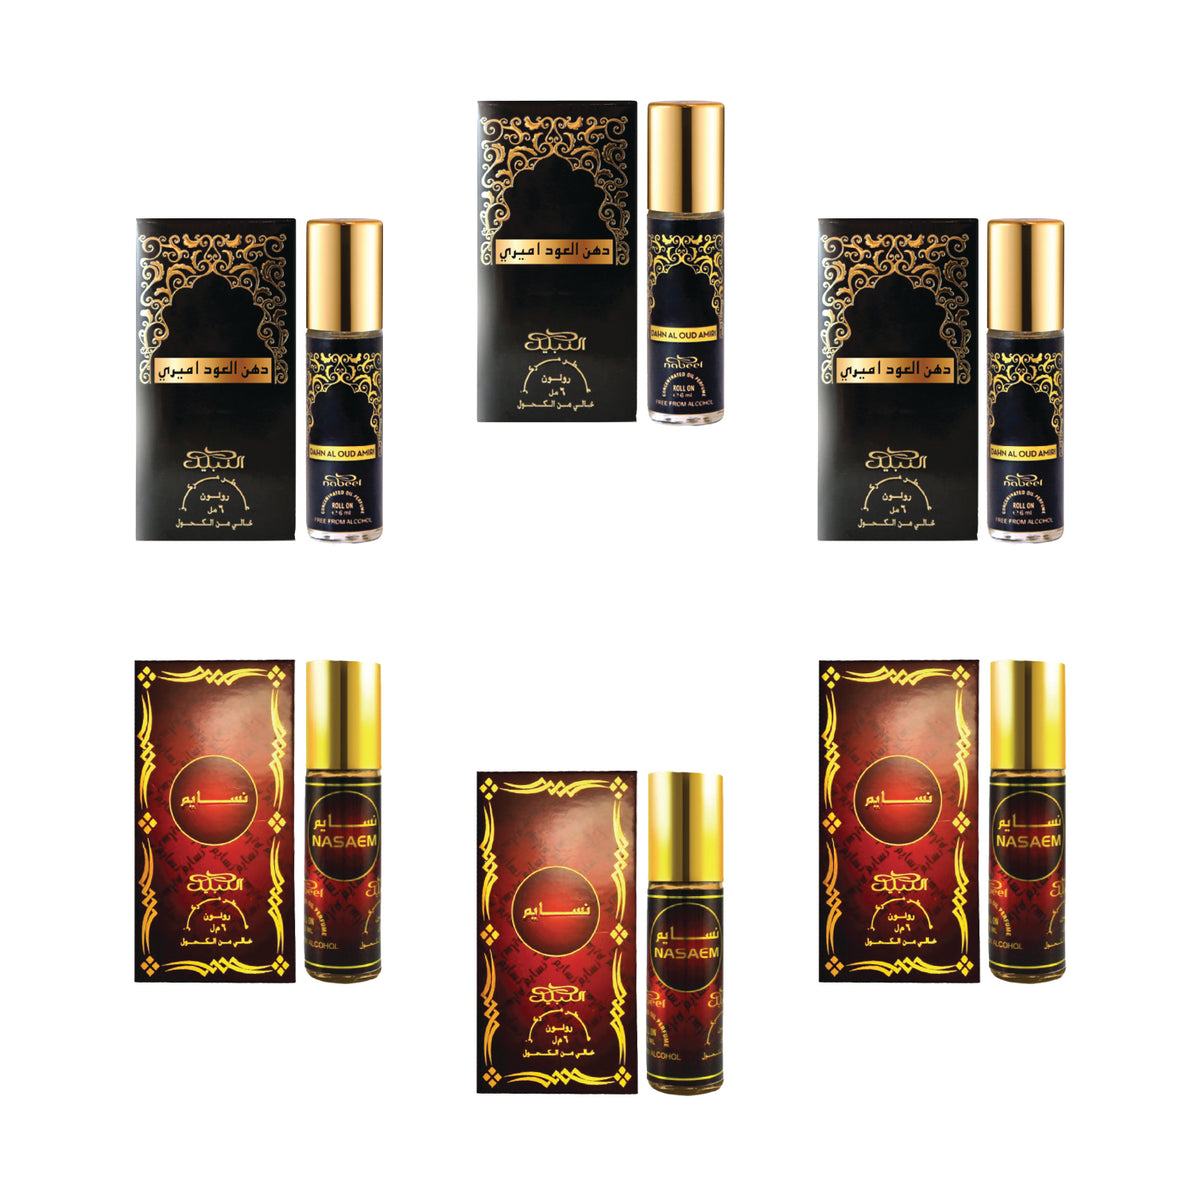 Nabeel - Premium Attar Roll-on Perfume Oil - Collection 13 - Dahn Al Oud Amiri, Nasaem | 100% Non Alcoholic | Gift Set - 6ml (Pack of 6) | Made in U.A.E